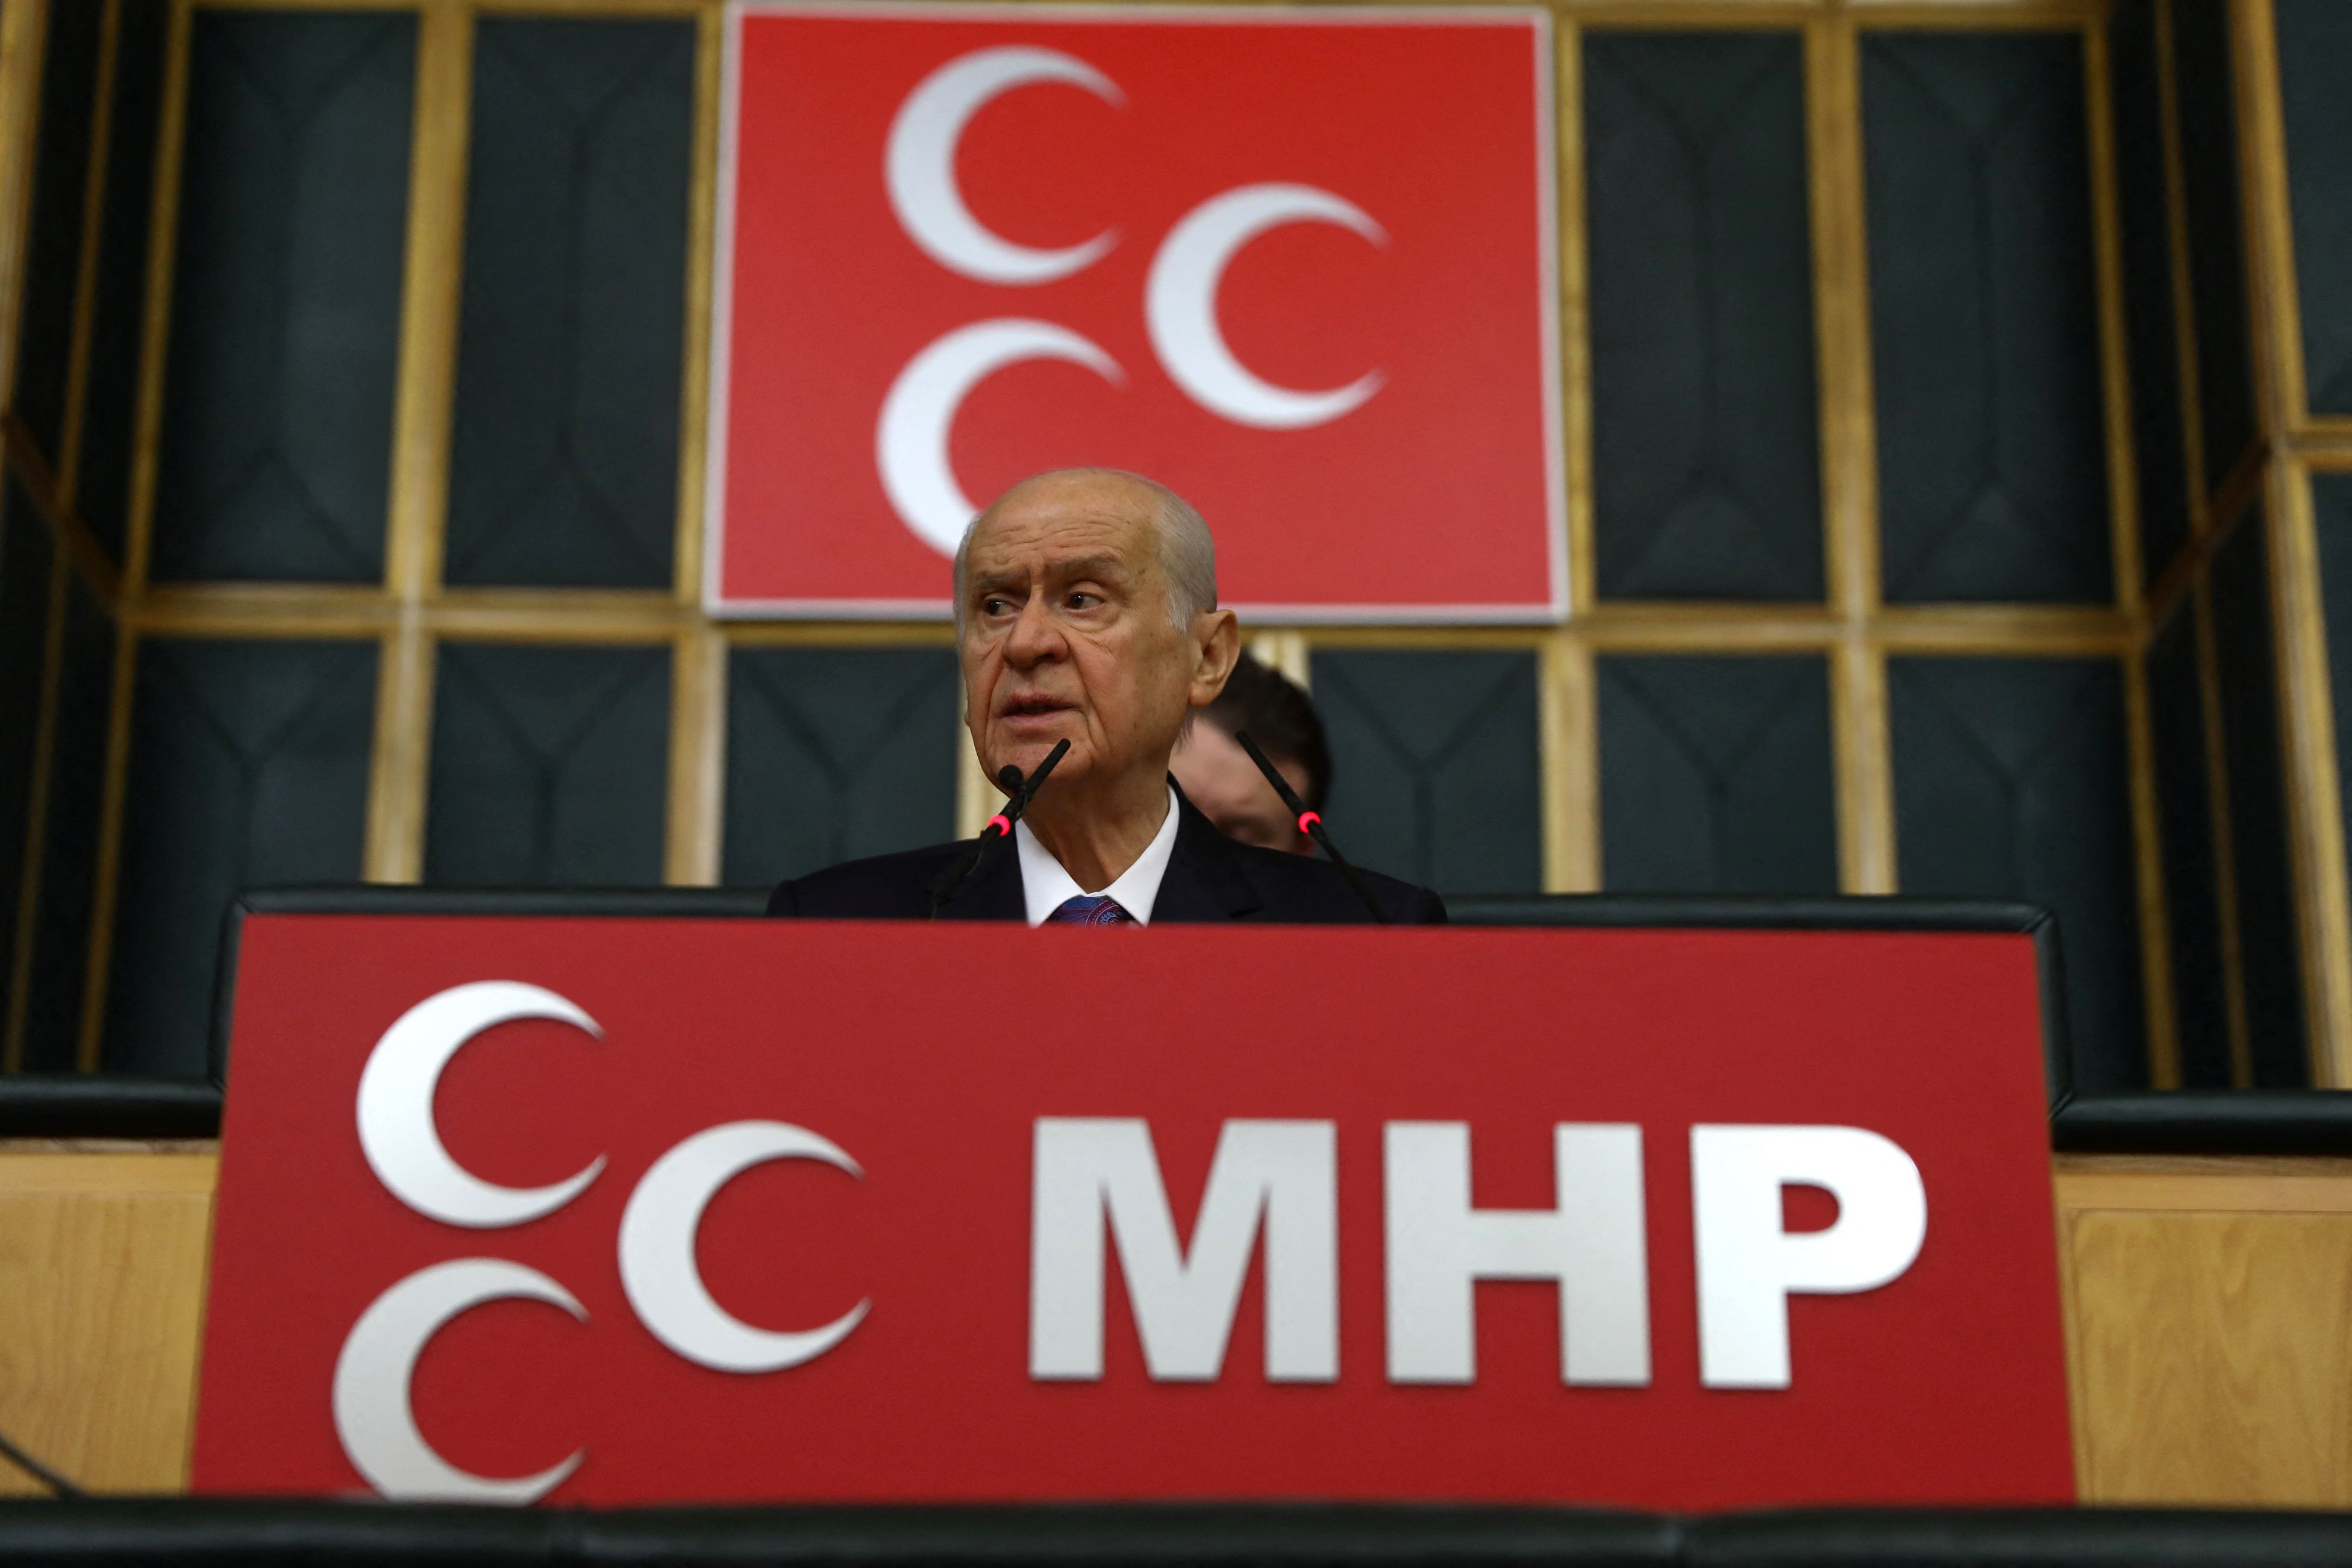 Turkey's Nationalist Movement Party's (MHP) Leader, Devlet Bahceli speaks during his party's group meeting at the Grand National Assembly of Turkey, in Ankara, on January 14, 2020 (AFP)